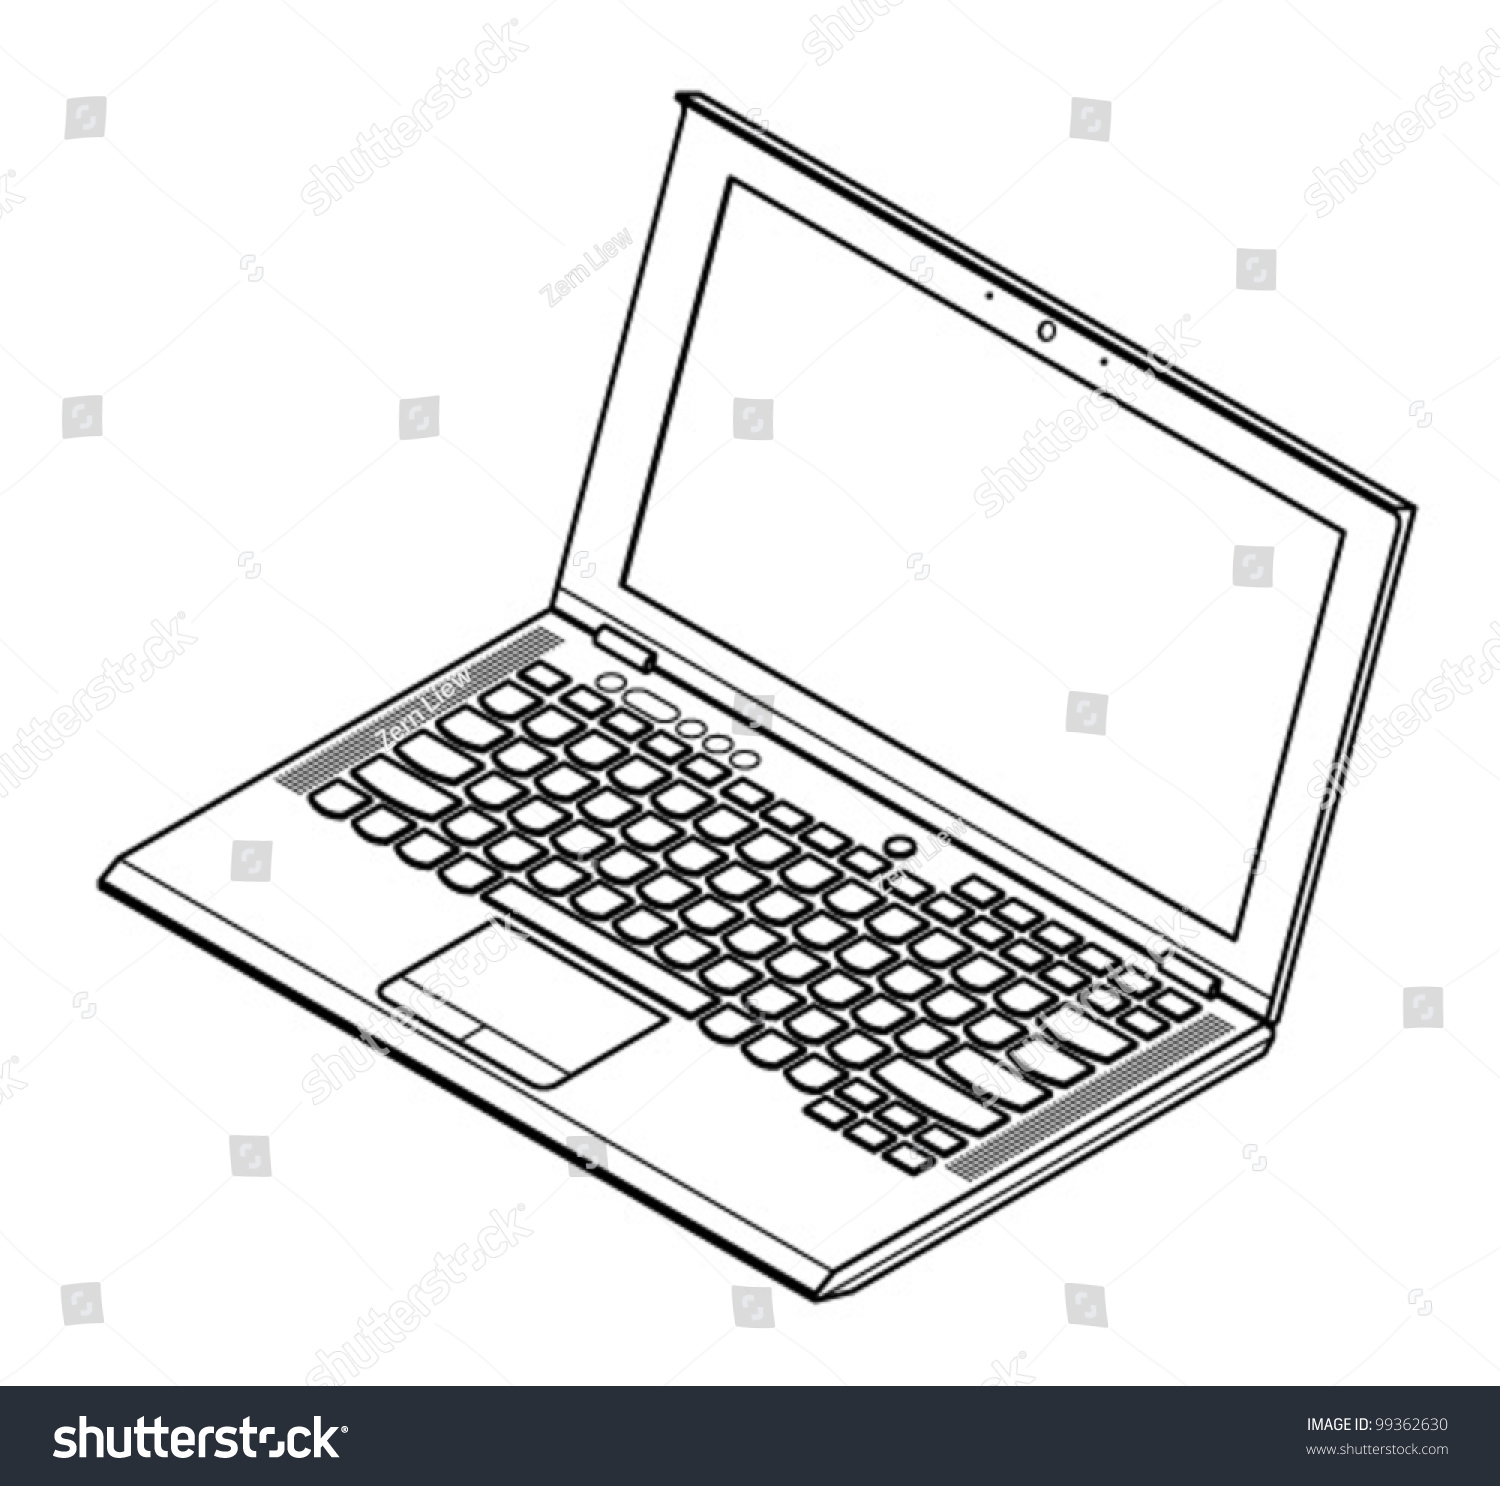 Lineart Detailed Isometric Drawing Mainstream Business Stock Vector 